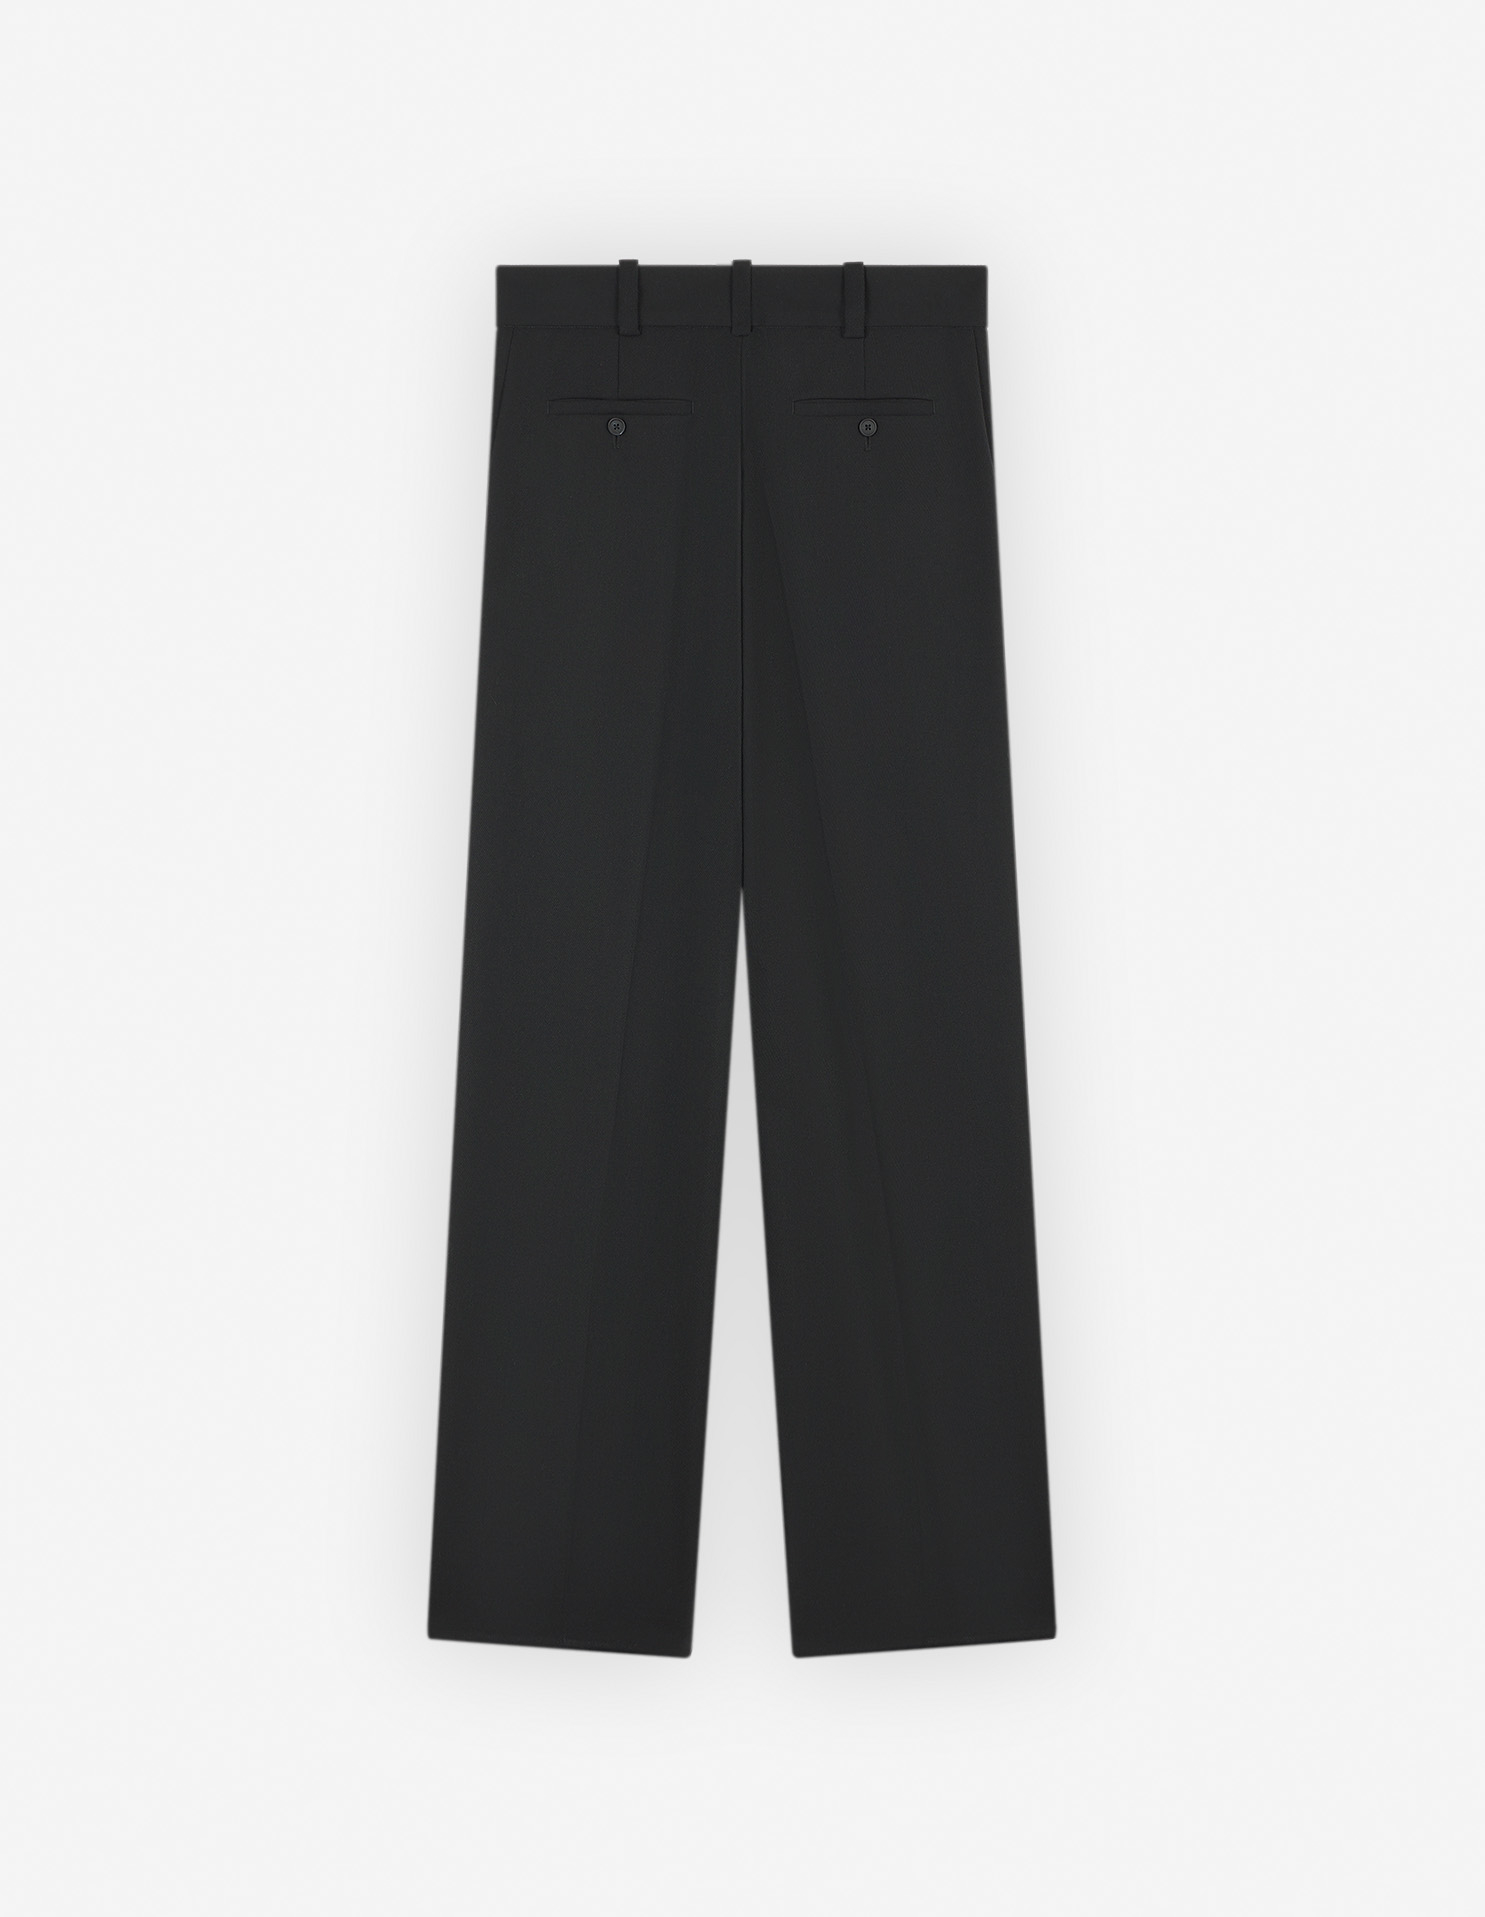 Louis Vuitton® Fluid Wool Tailored Pants  Bottom clothes, Tailored pants,  Ready to wear